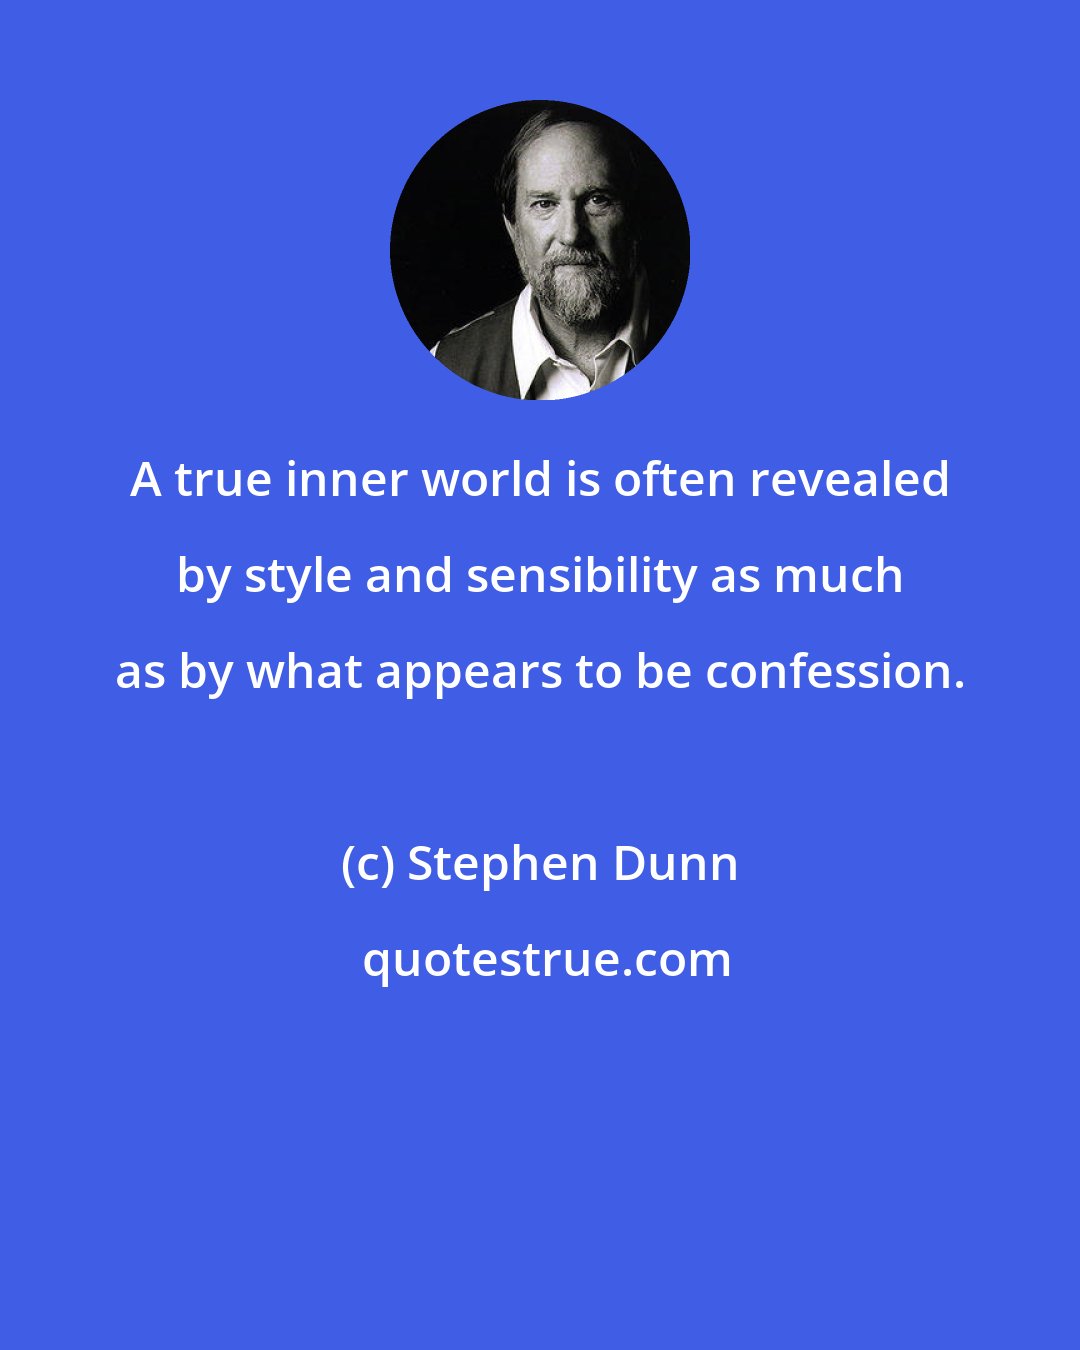 Stephen Dunn: A true inner world is often revealed by style and sensibility as much as by what appears to be confession.